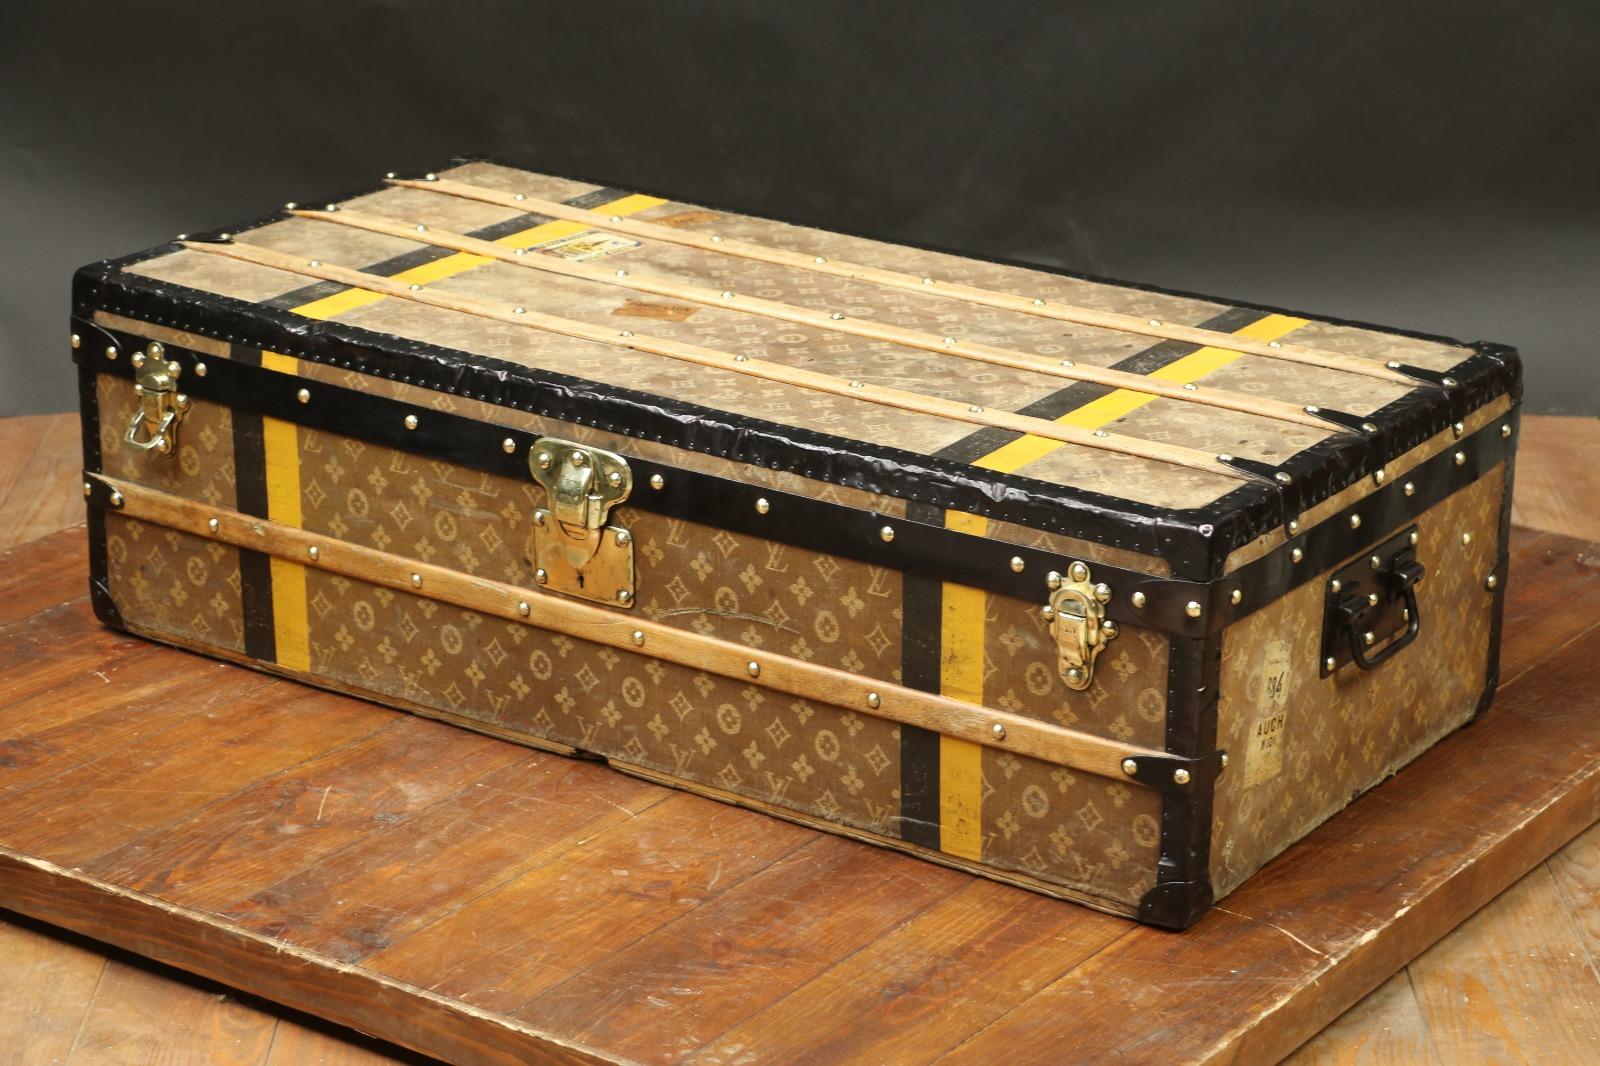 Beautiful 1st Monogram Woven Canvas Cabin Trunk (used from 1896 to 1905 )
Original 